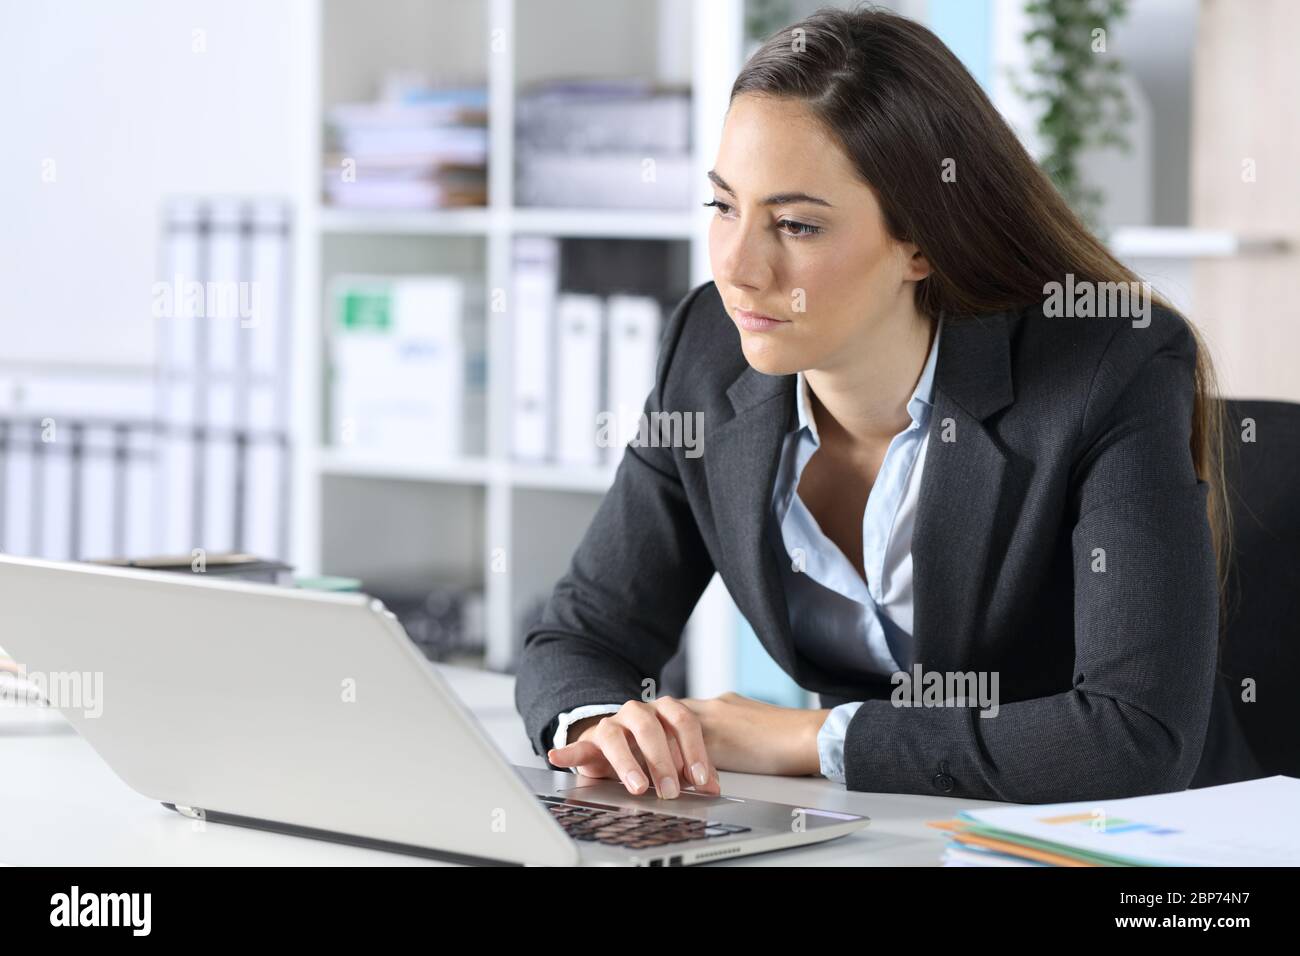 Distracted executive woman with laptop looking away sitting on her desk at the office Stock Photo